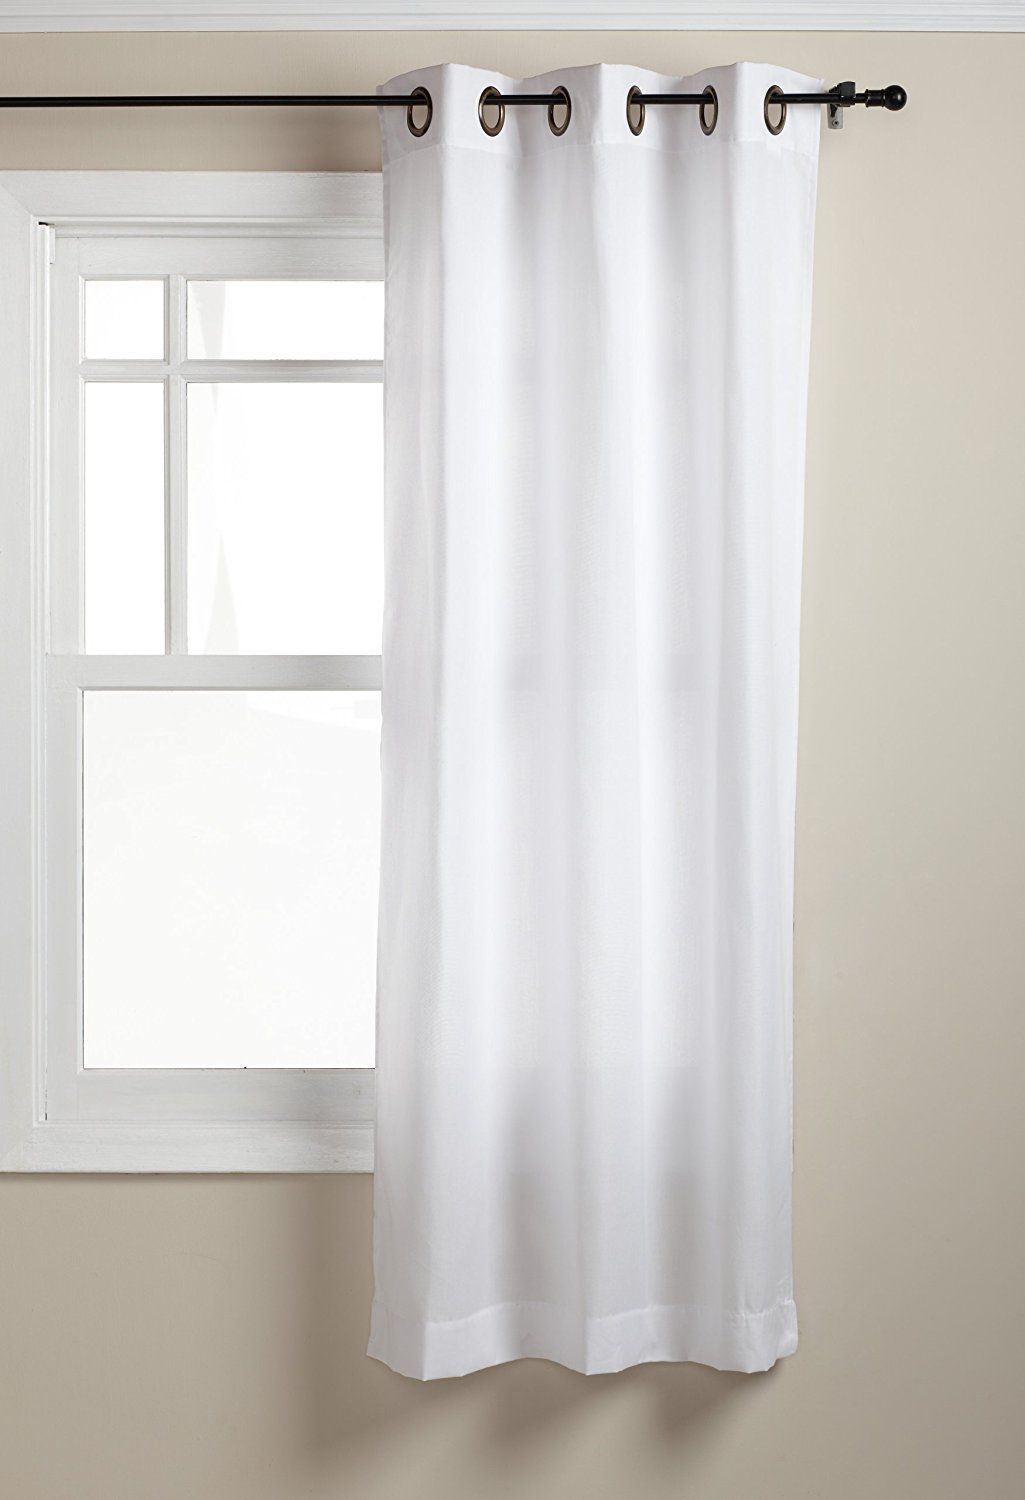 Amazon Stylemaster Malibu 40 63 Inch Sail Cloth Grommet In 63 Inches Long Curtains (View 5 of 25)